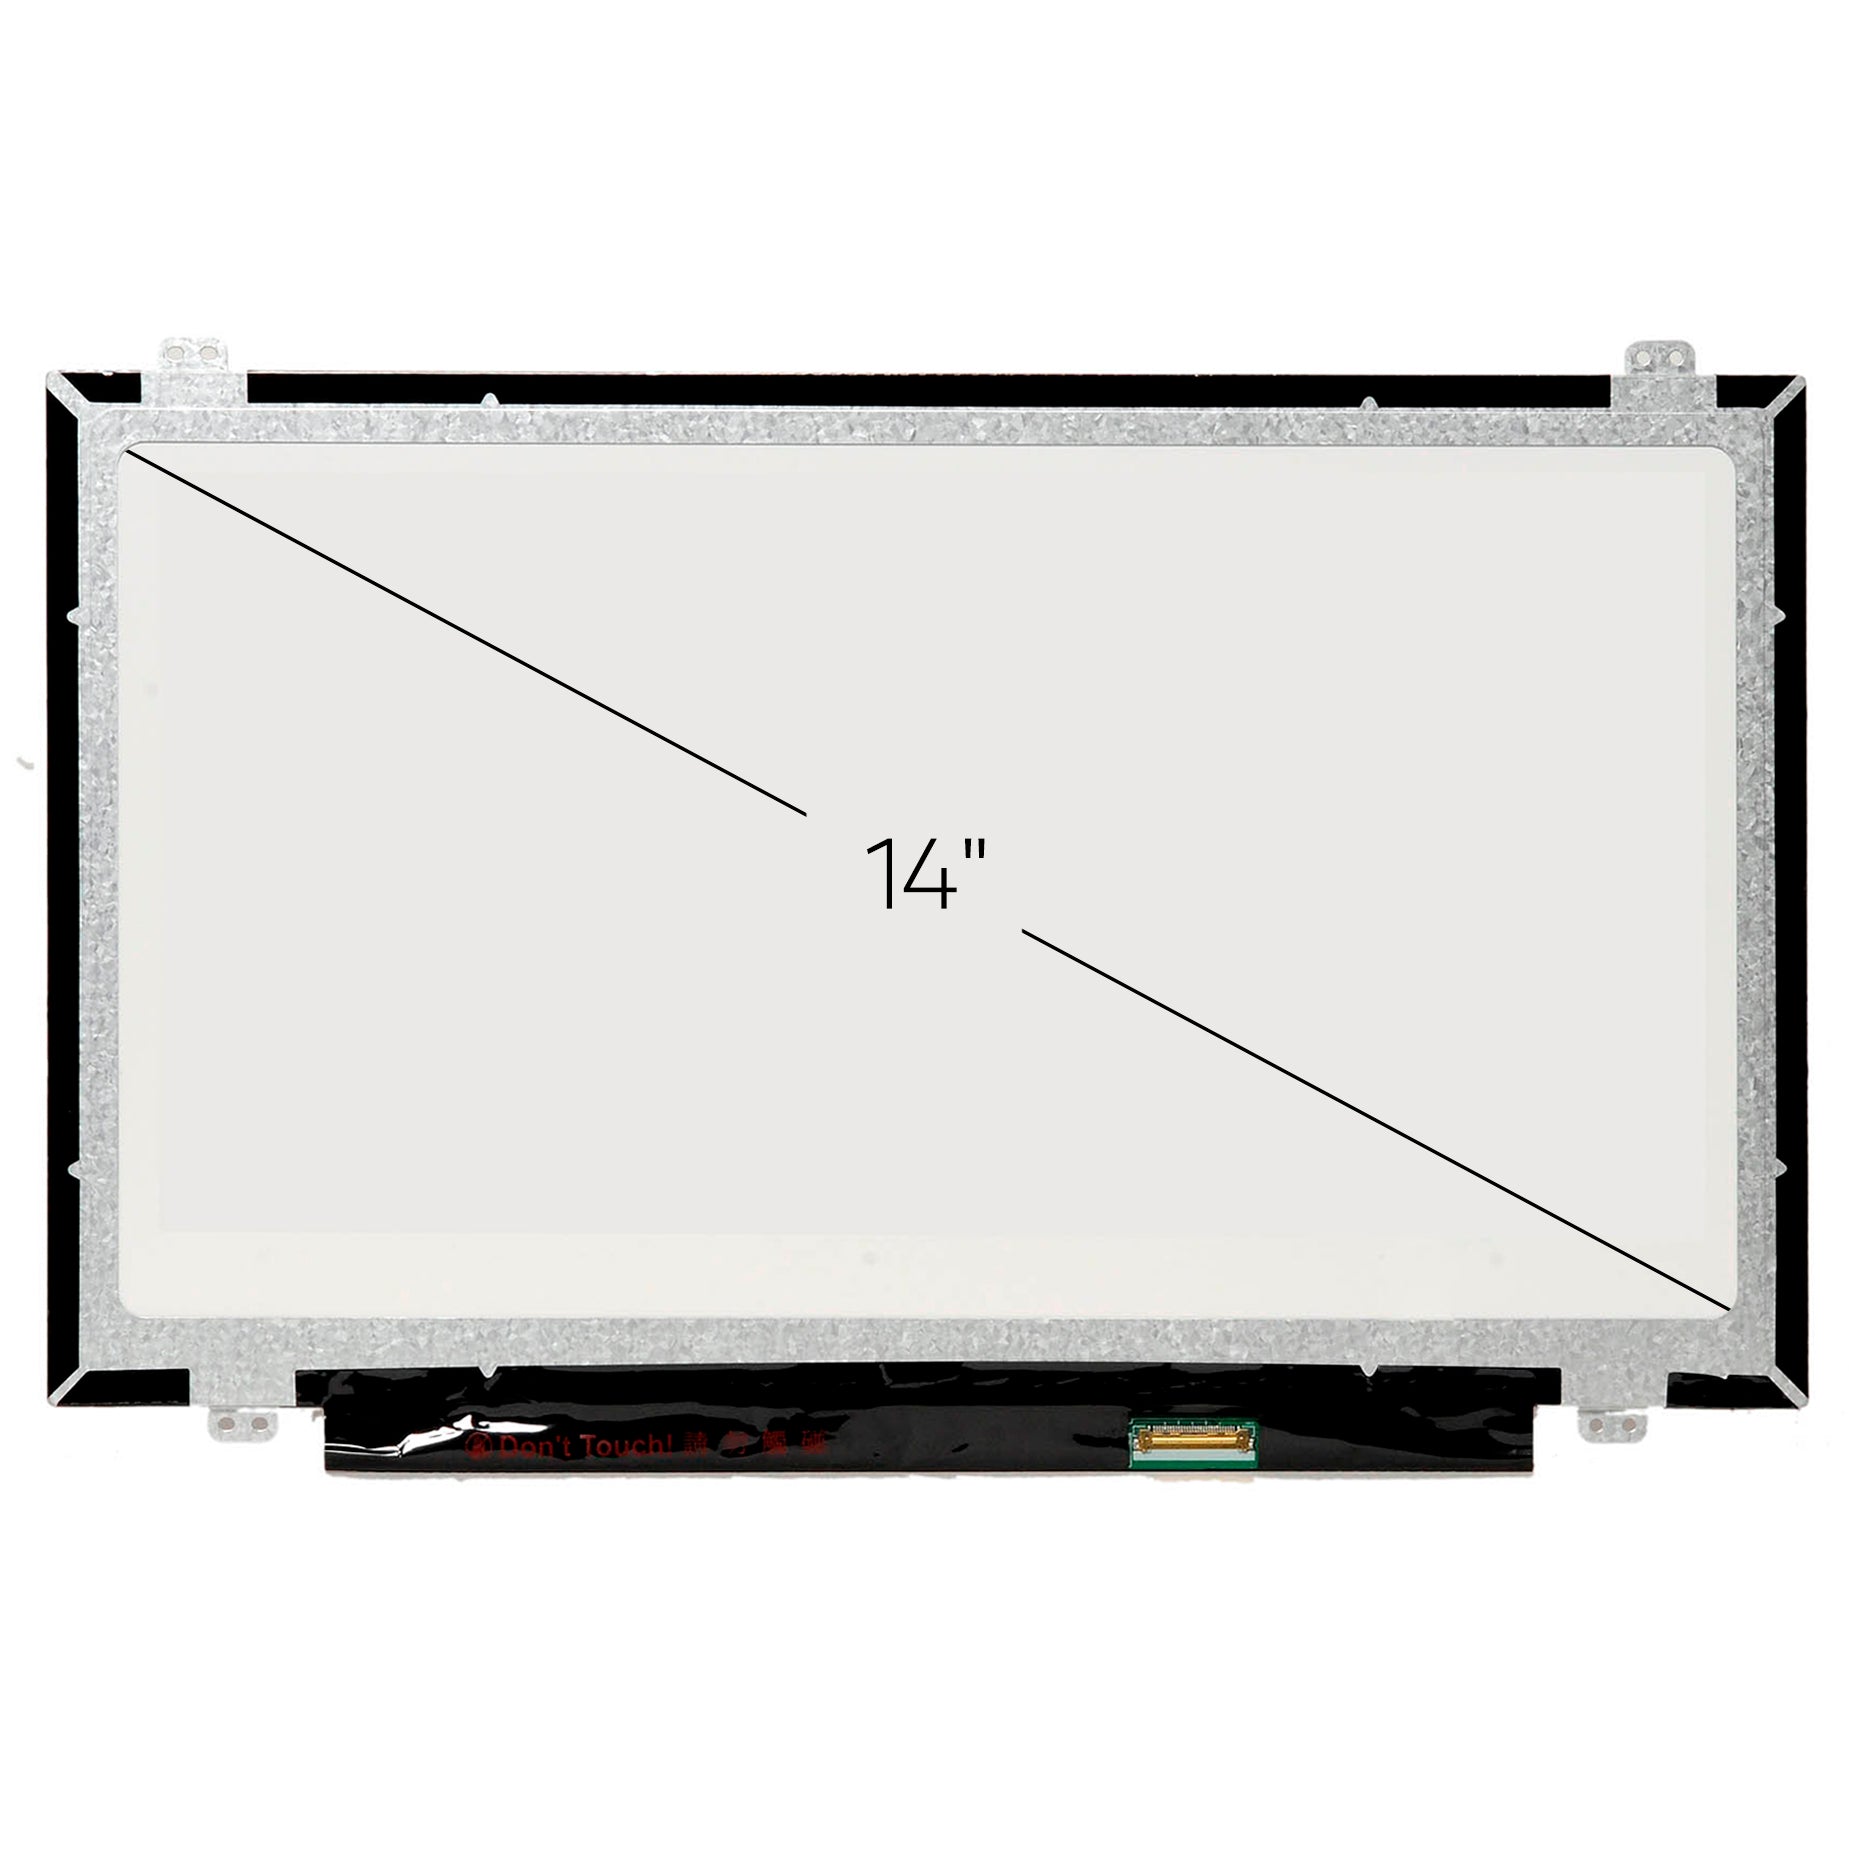 Screen Replacement for Acer Aspire A114-32 HD 1366x768 Glossy LCD LED Display